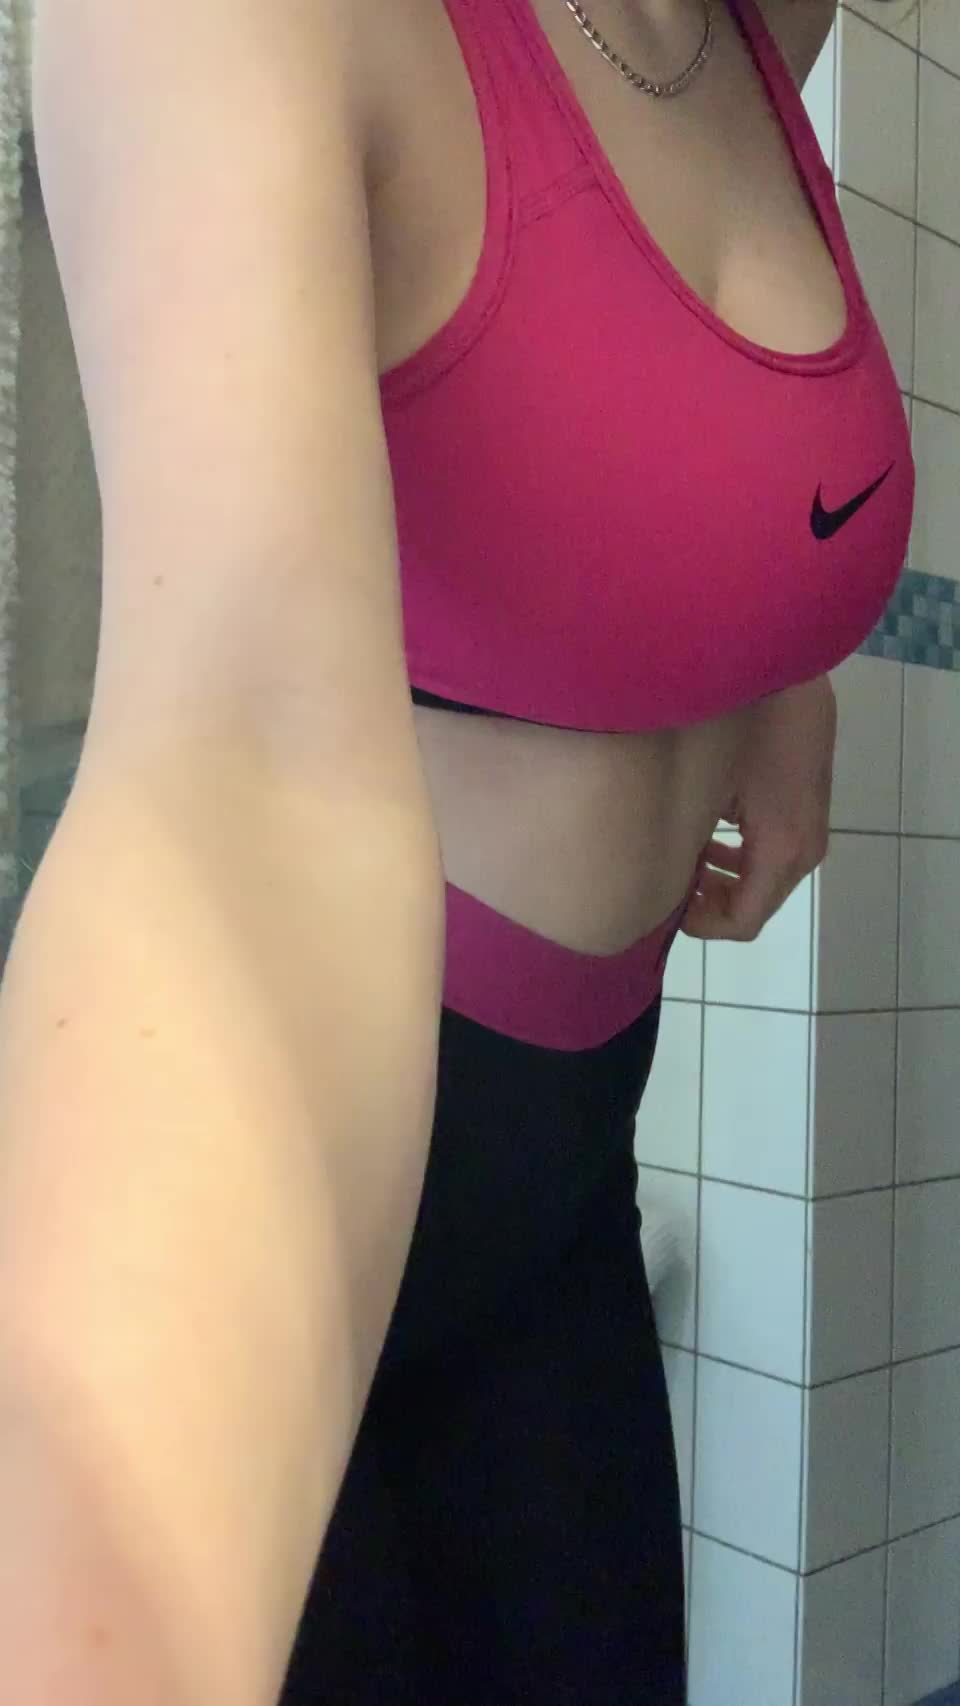 Getting ready for shower after the dance class😈 : video clip